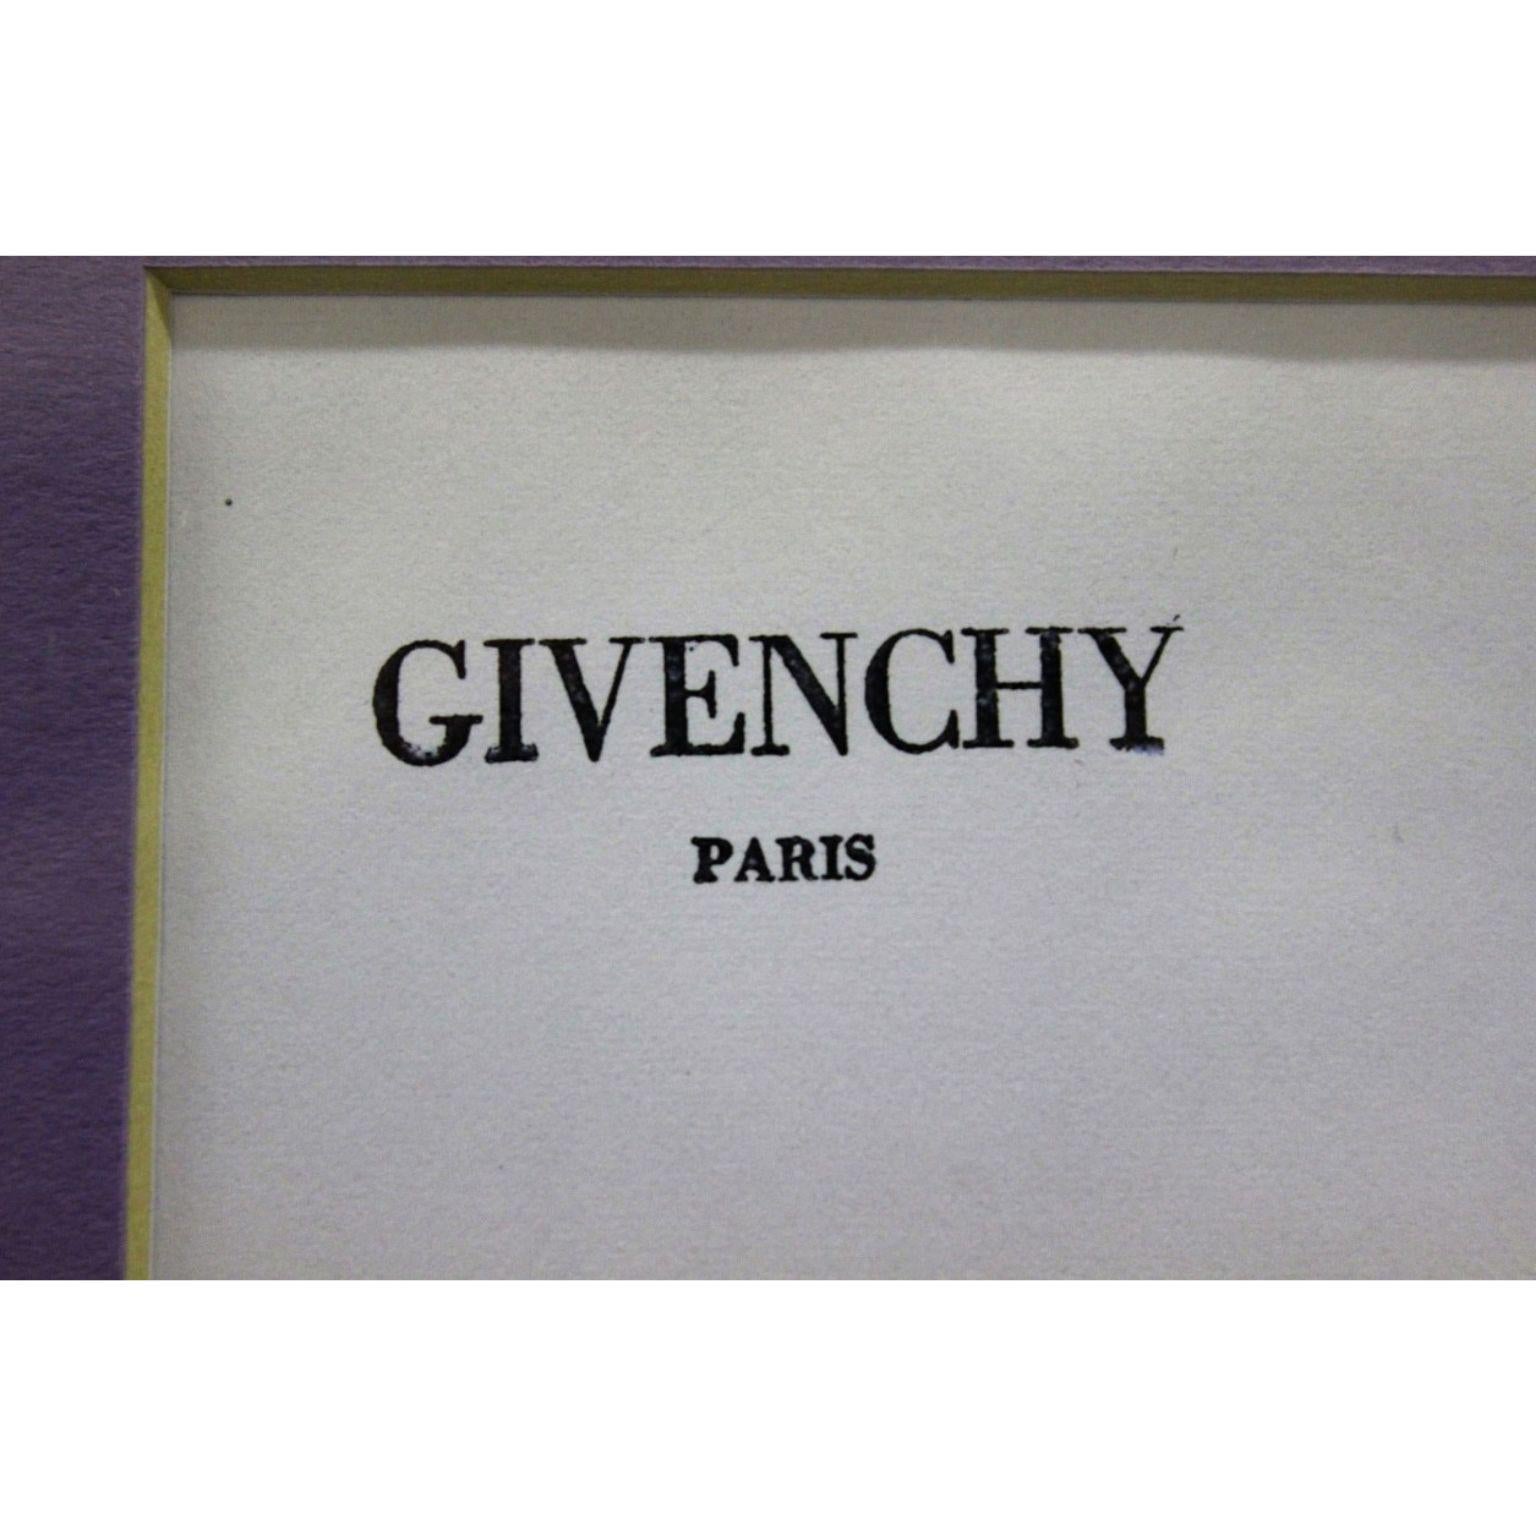 Givenchy Paris No.52 - Art by Unknown